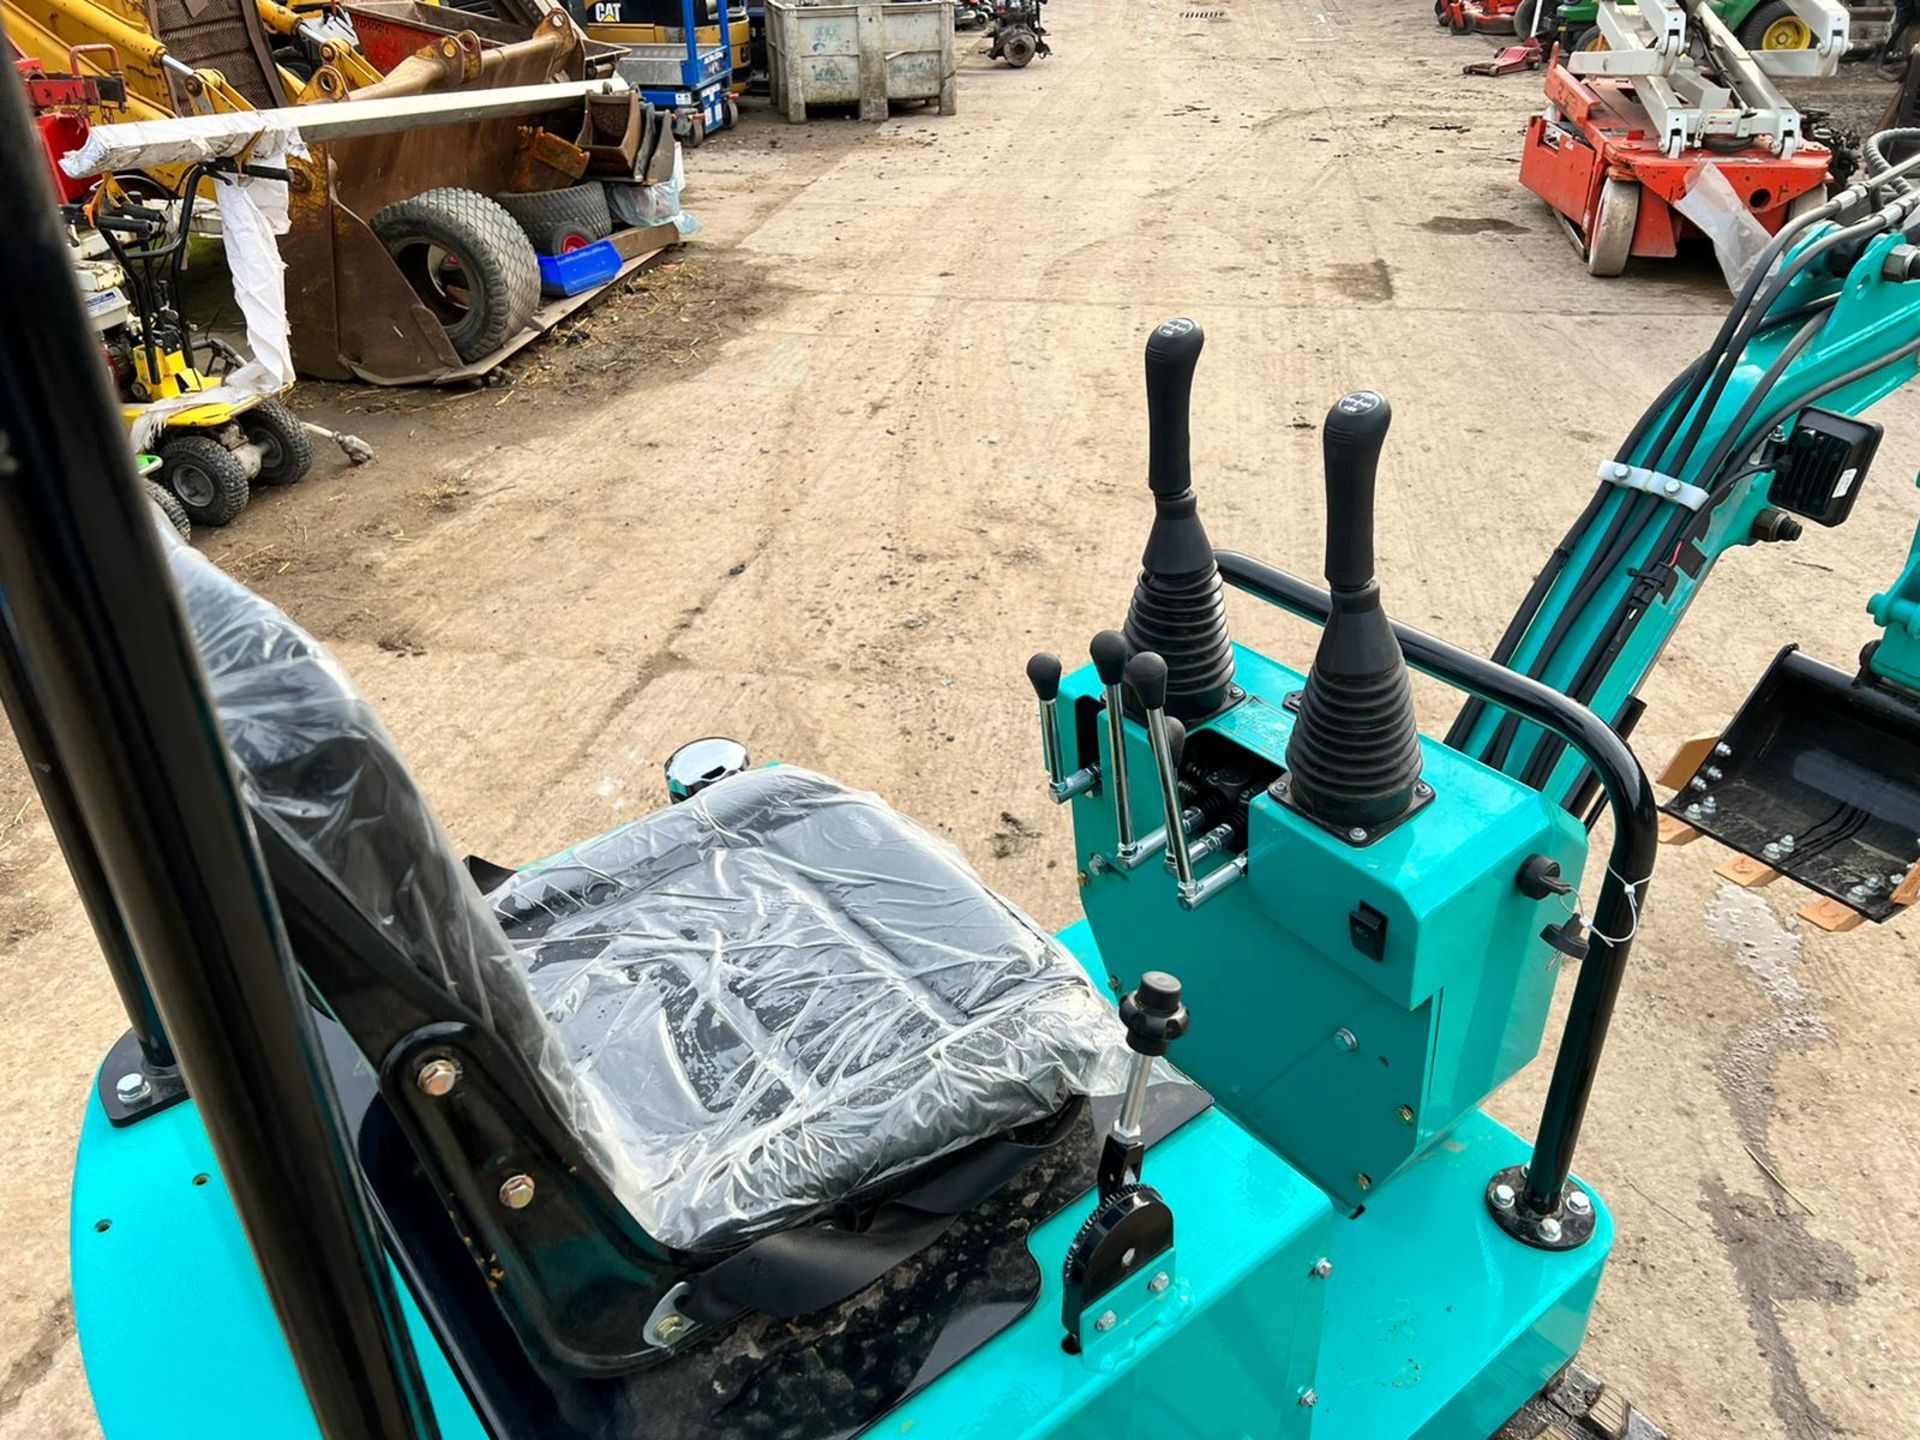 New And Unused JPC PC10 1 Ton Mini Digger, Runs Drives And Digs, Rubber Tracks *PLUS VAT* - Image 10 of 10